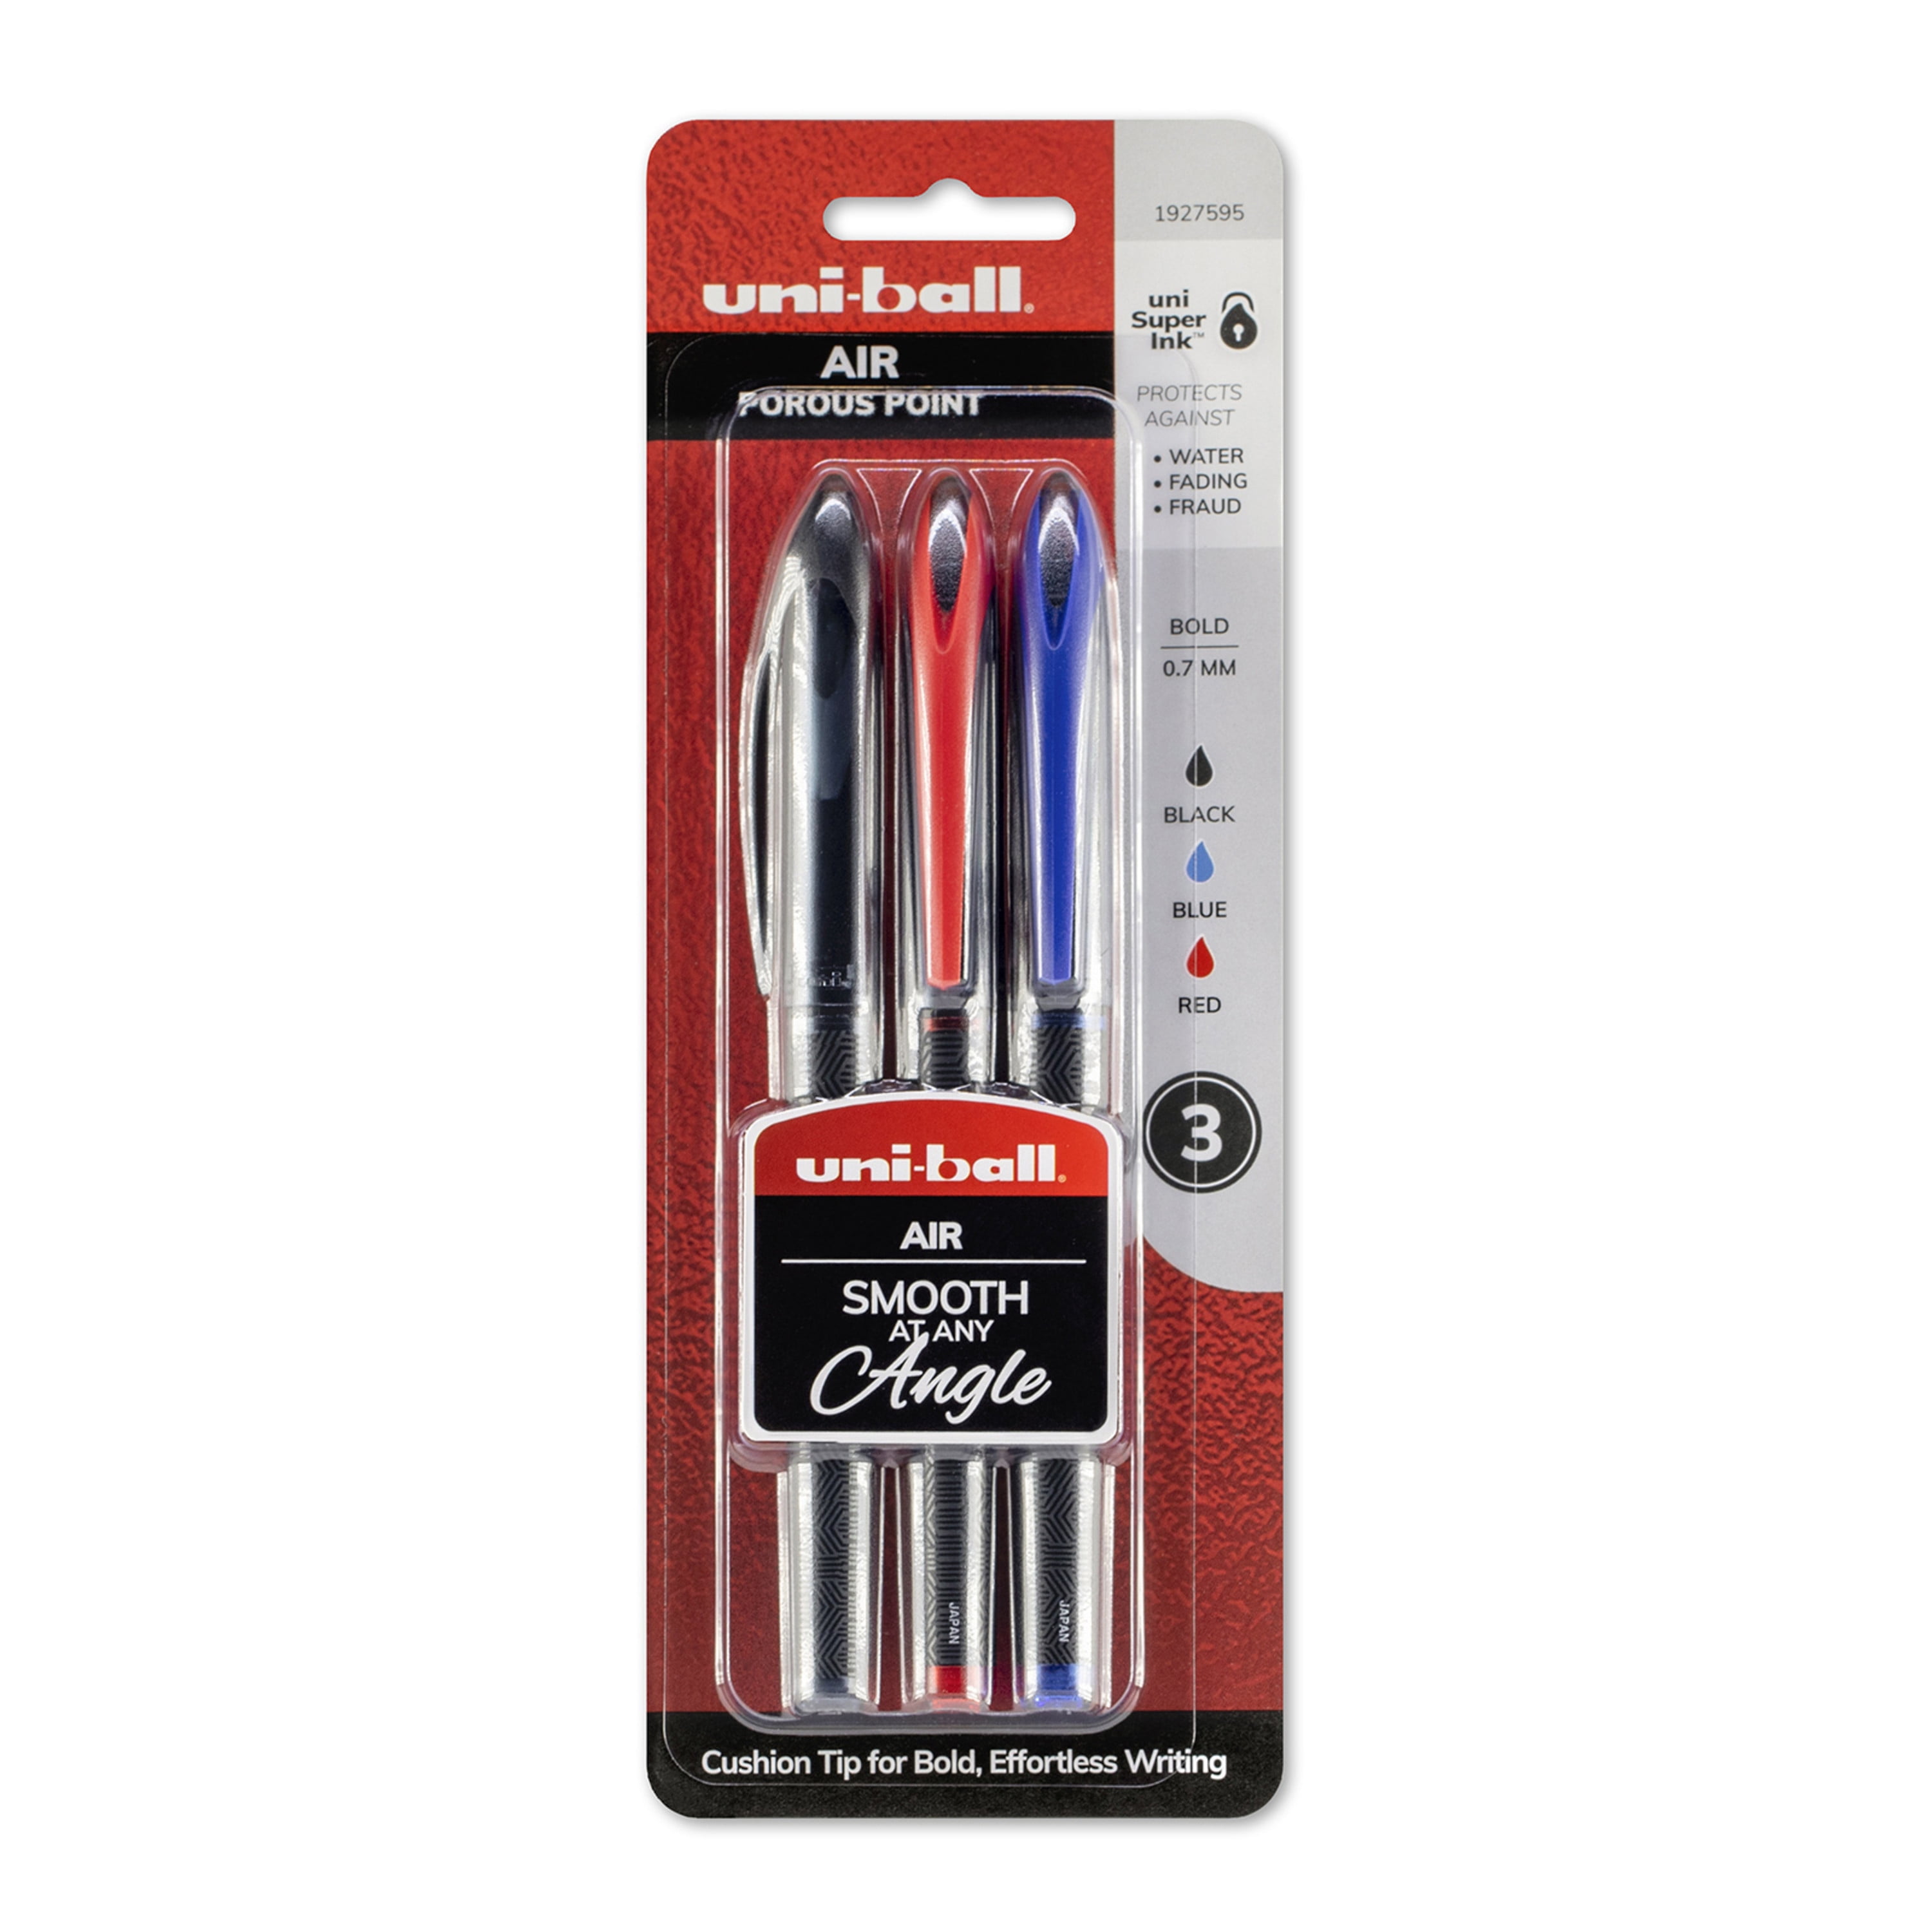 2 Black UniBall AIR MICRO 0.5mm Rollerball Pen,Set of 6 Pens 2 Blue 2 Red 